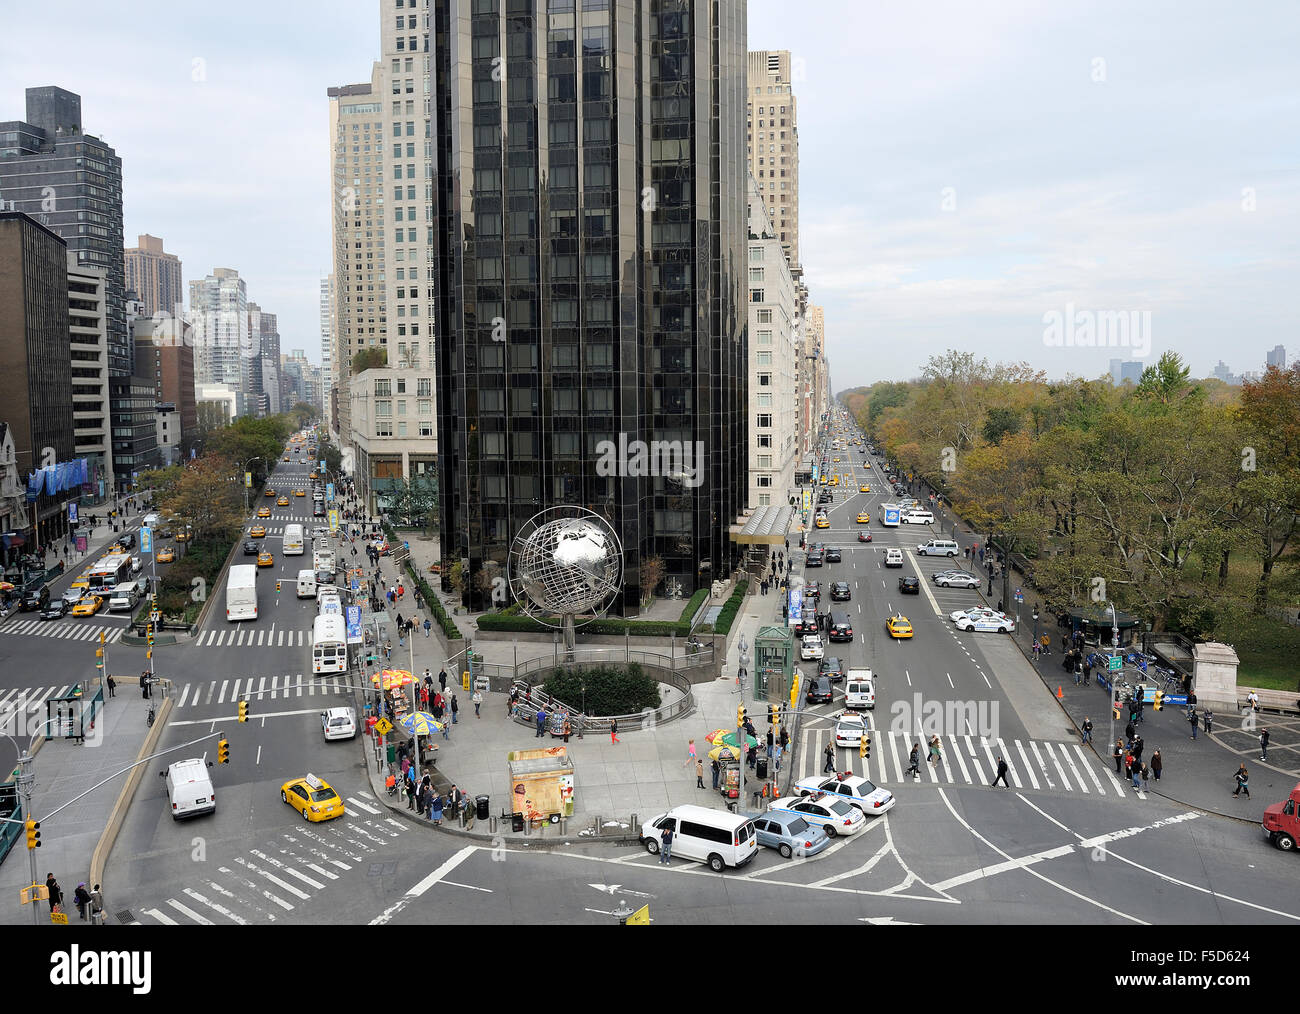 View at Columbus Circle in N.Y. near Central Park.With taxis and globe in front of the Trump Tower. Stock Photo